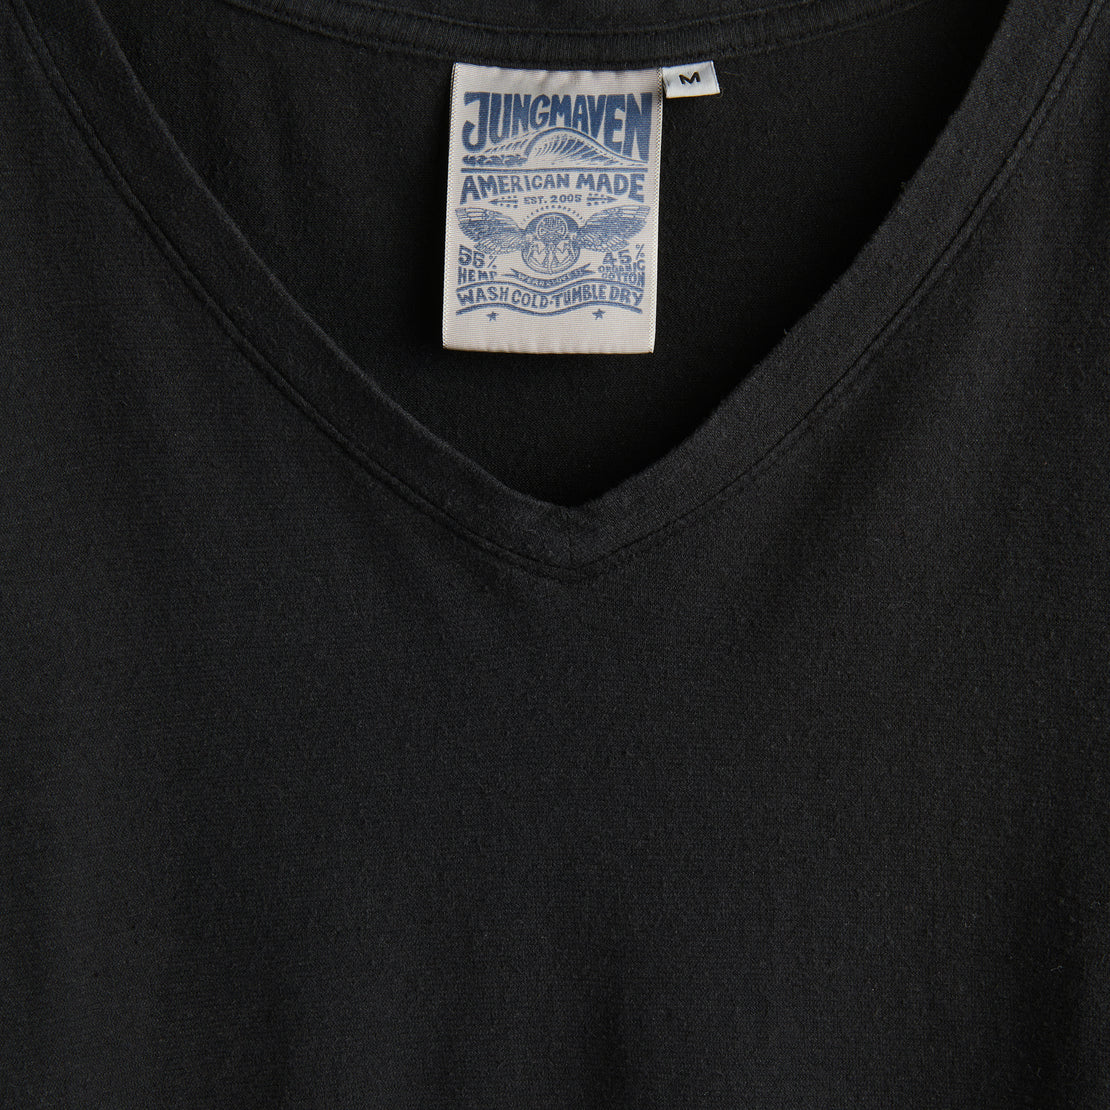 Paige V-Neck - Black - Jungmaven - STAG Provisions - W - Tops - S/S Tee